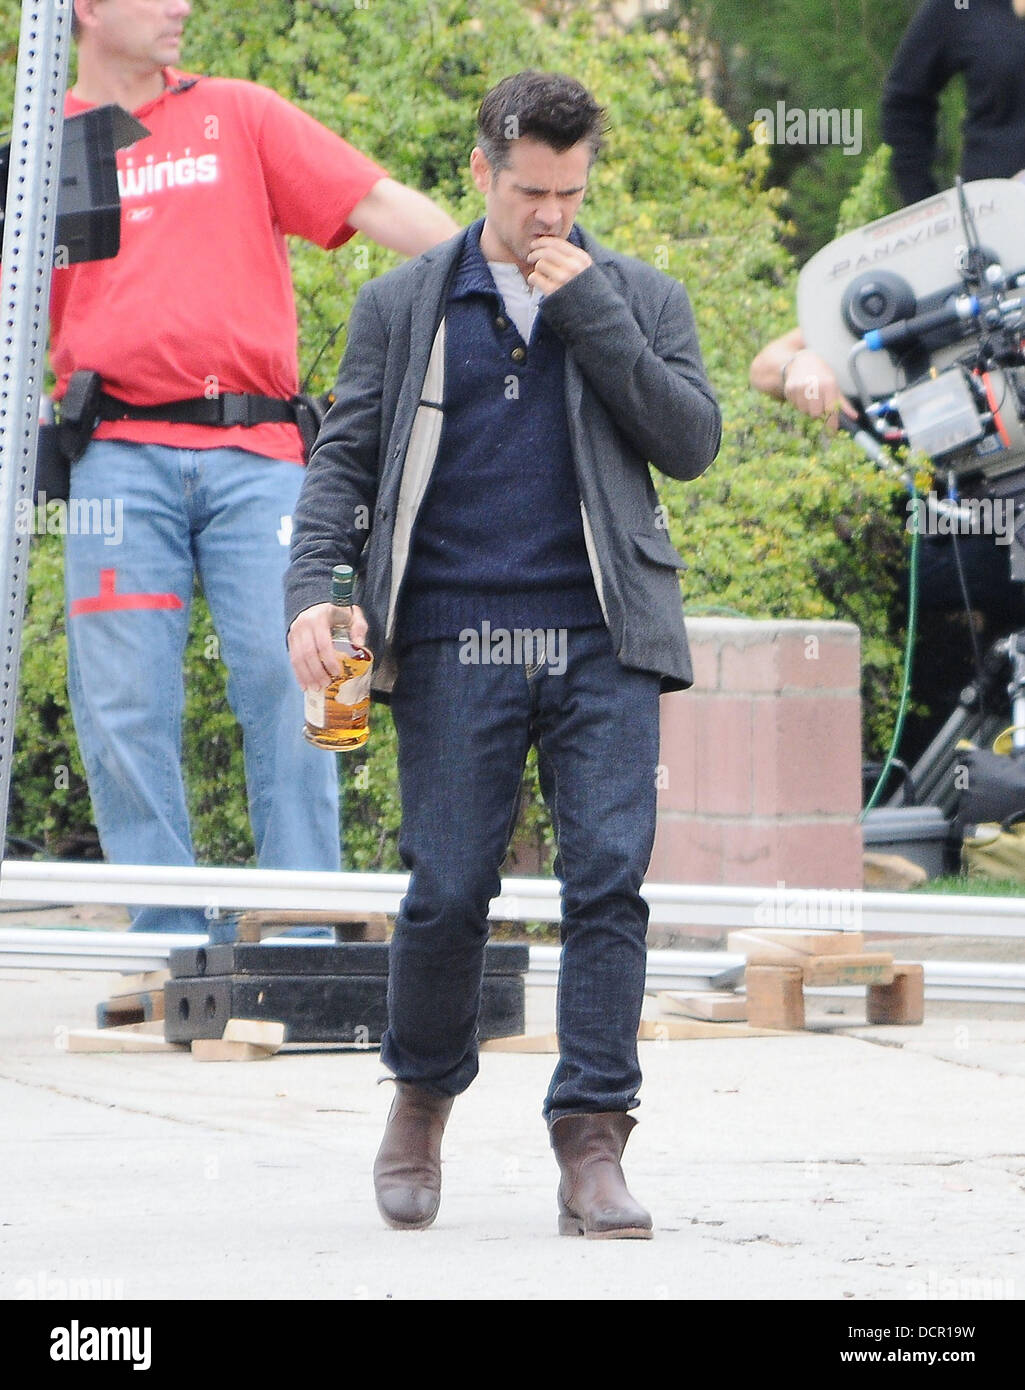 Irish actor, Colin Farrell looks inebriated as he drinks from a bottle of Buffalo Trace Kentucky Straight Bourbon Whiskey, as he films a scene of new movie 'Seven Psychopaths', a film about a man who gets involved in a friend's dog-napping plot. Los Angel Stock Photo